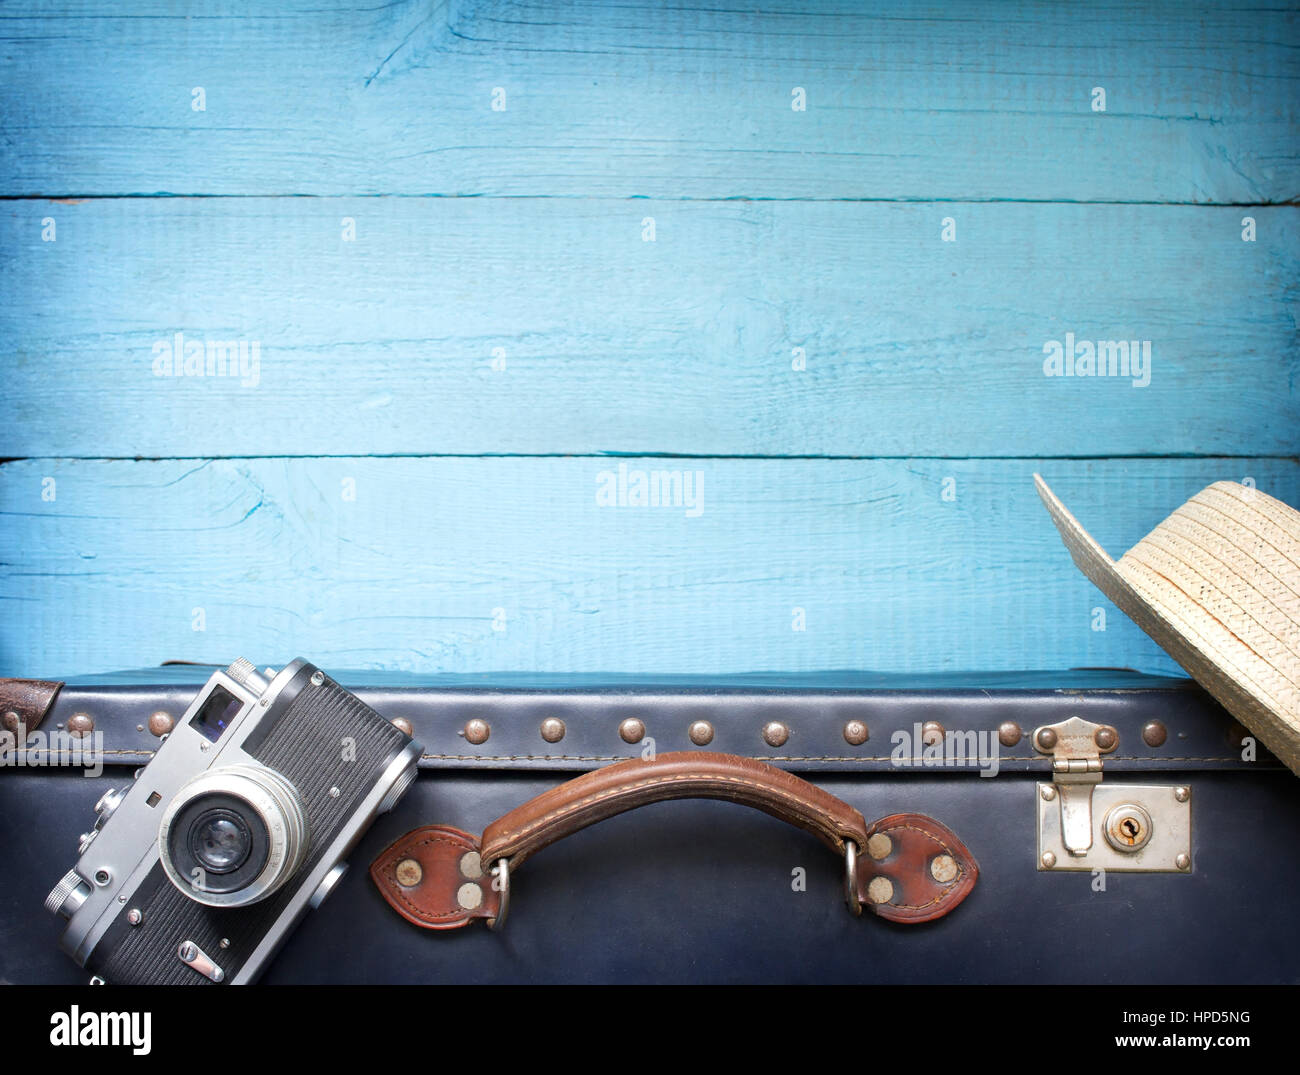 Old retro vintage suitcase and camera tourism travel background concept Stock Photo